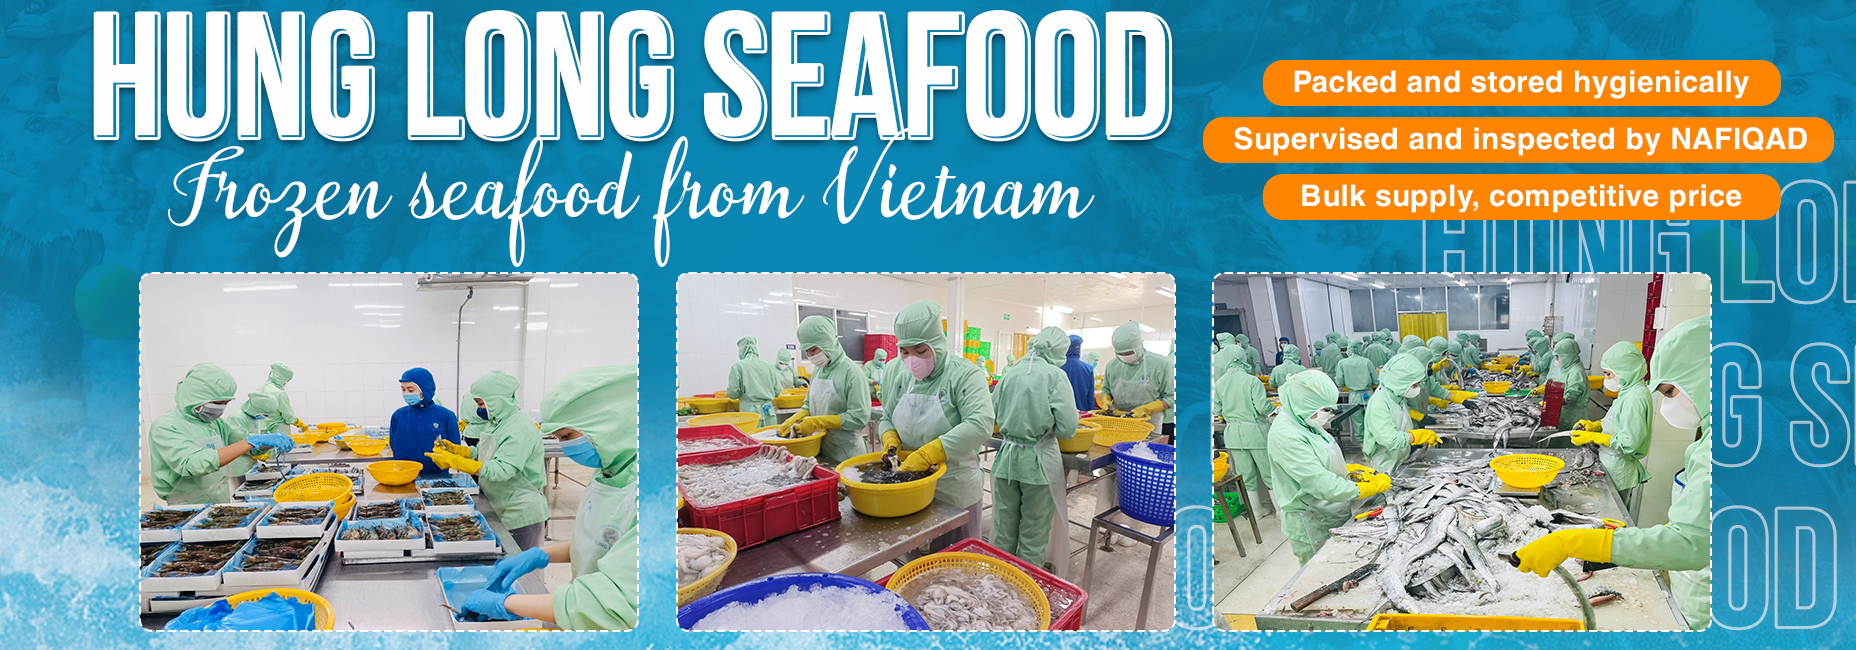 HUNG LONG SEAFOOD IMPORT AND EXPORT CO., LTD